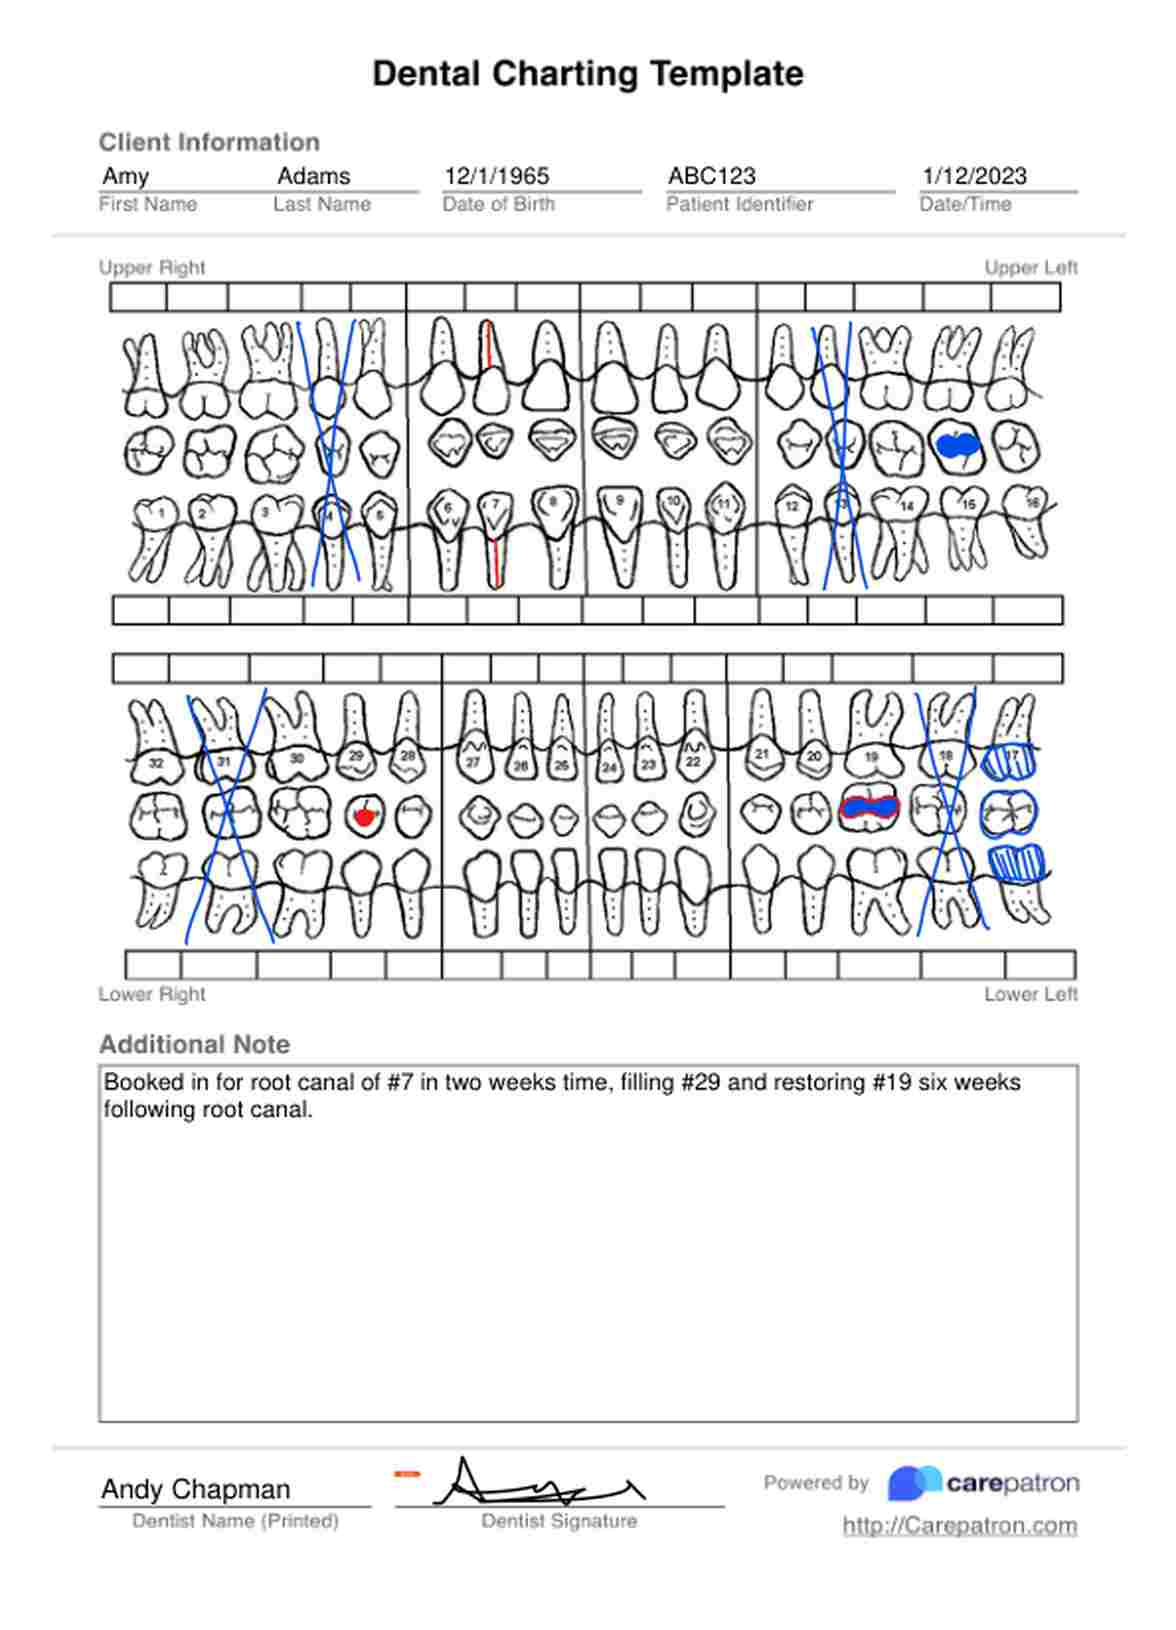 Dental Charting Template PDF Example